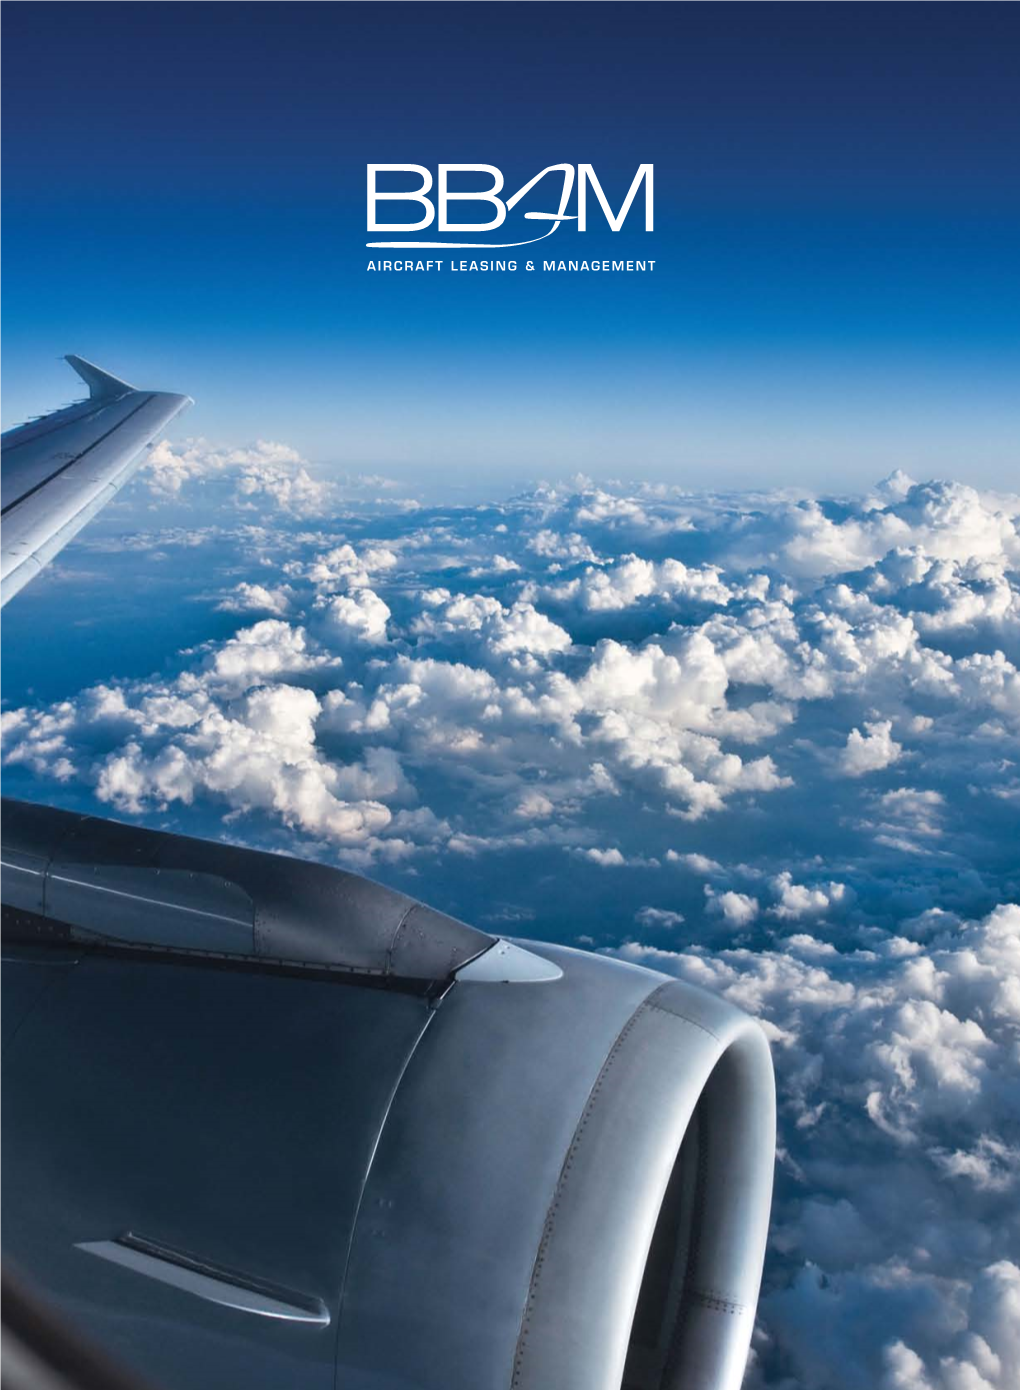 About BBAM (PDF 1.6MB)